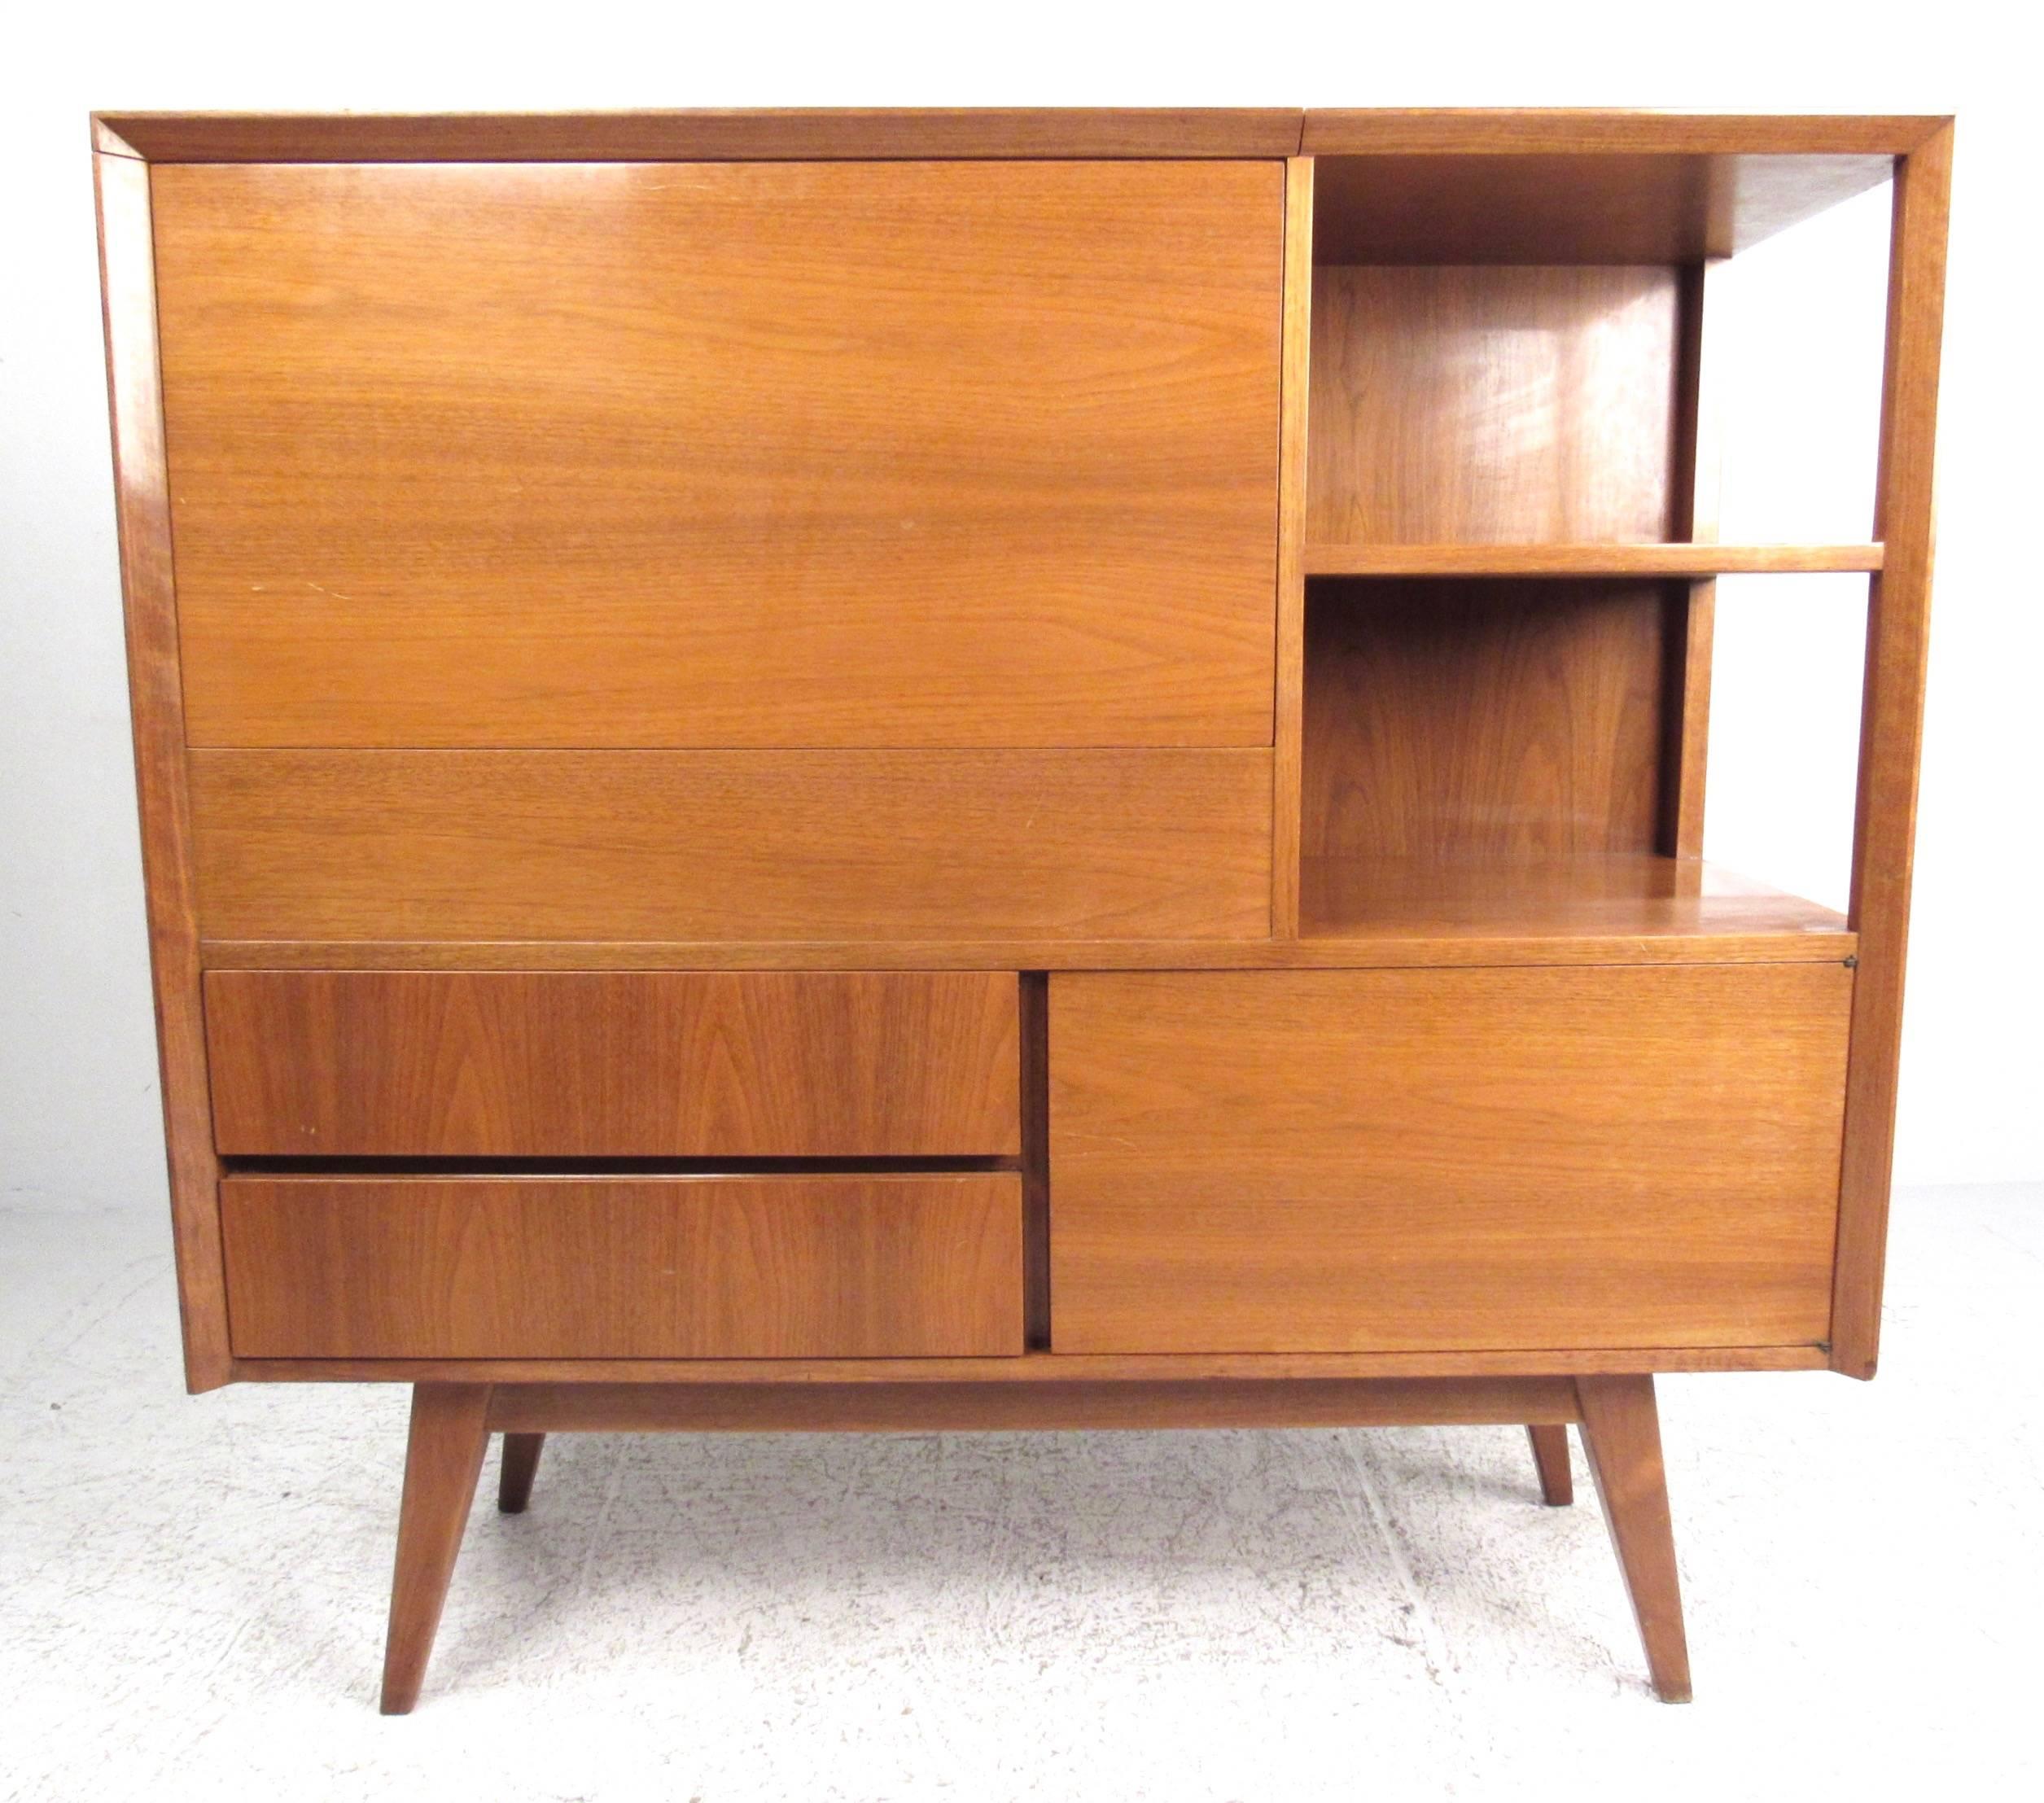 This unique vintage bar cabinet features a beautiful Mid-Century array of storage options complete with drop front laminate bar with mirrored back and glass shelf. Sculpted tapered legs, shelf display, and drawer or cabinet storage add to the